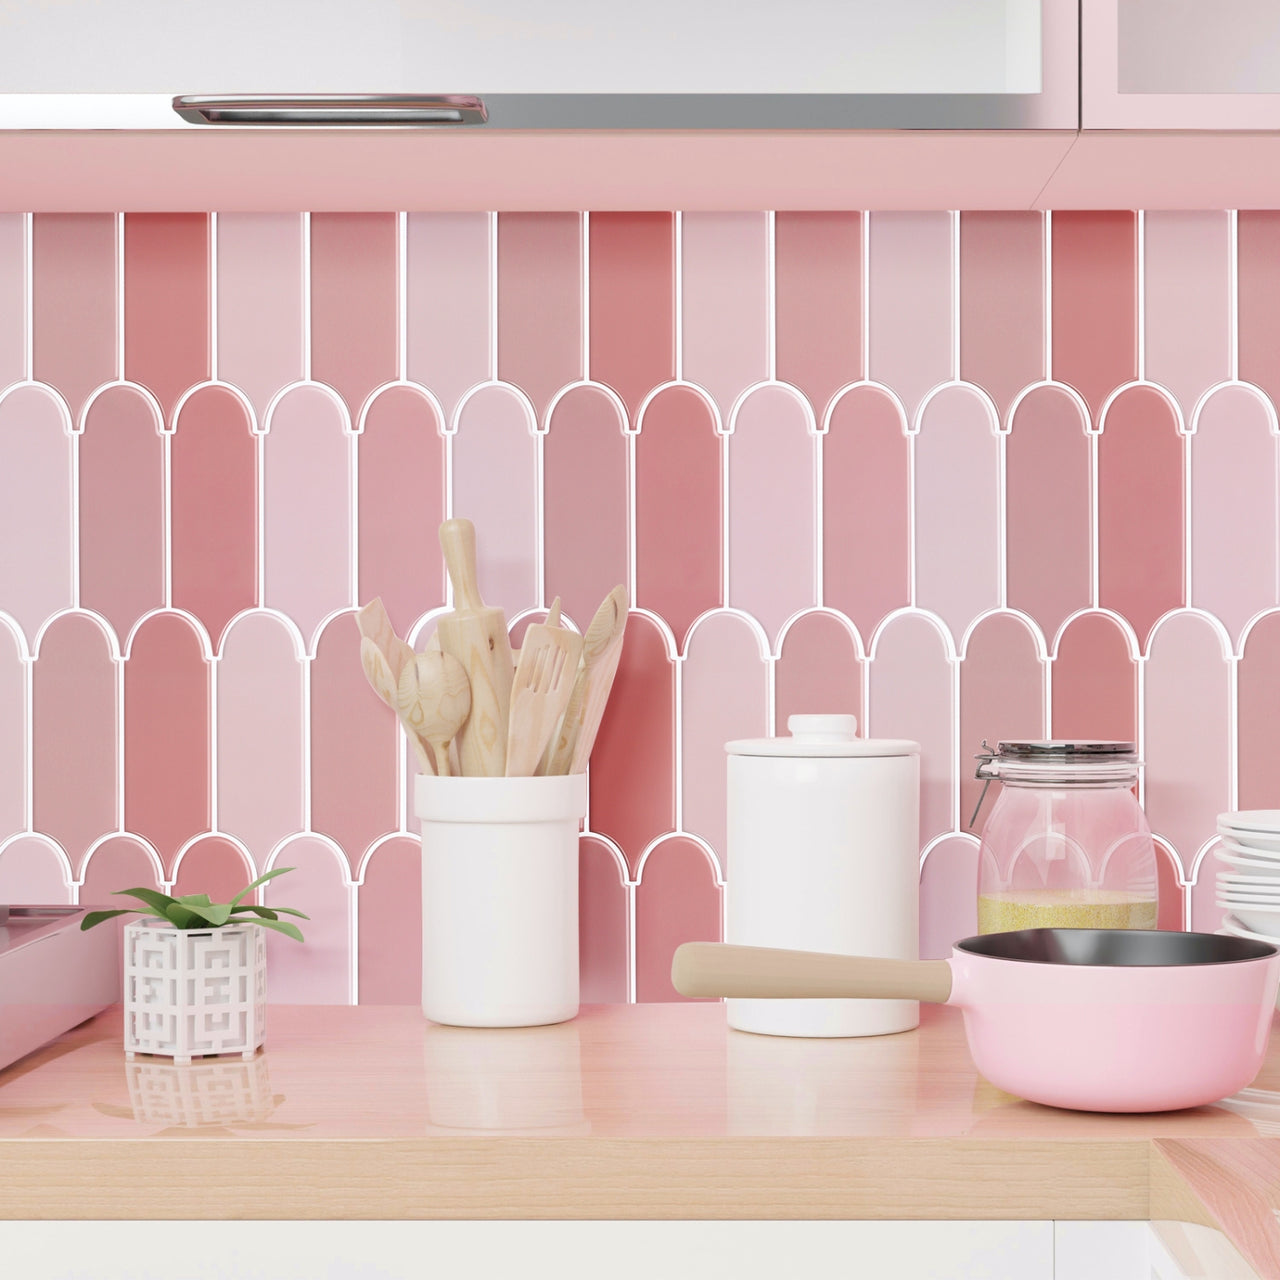 Pink feather tiles as a kitchen splash back